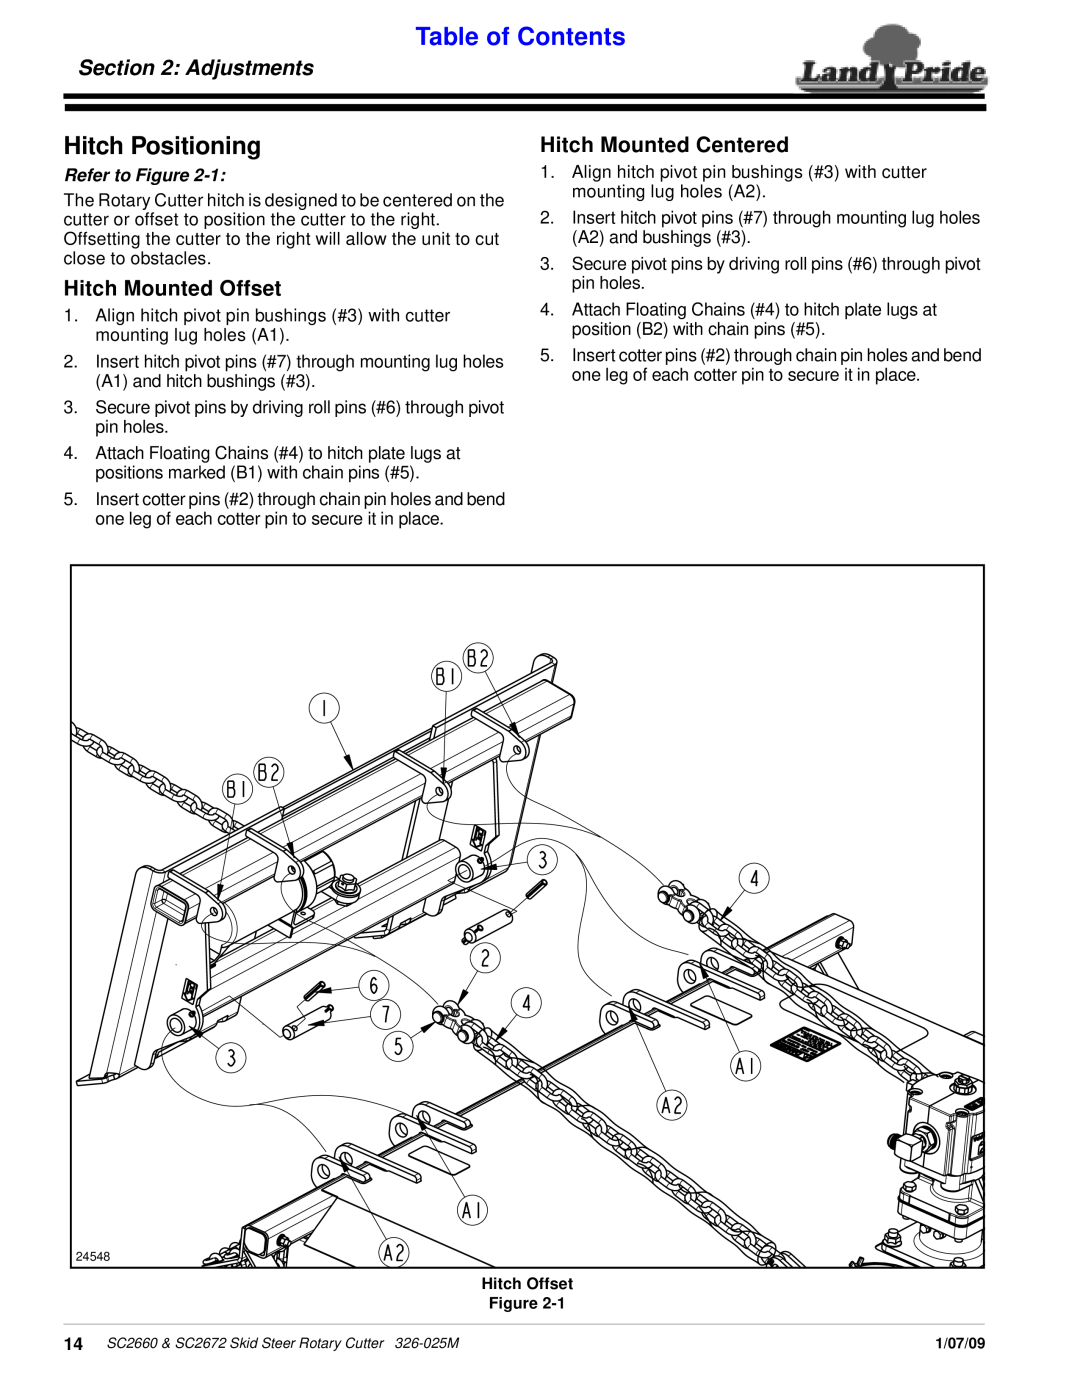 Land Pride SC2660, SC2672 Hitch Positioning, Adjustments, Hitch Mounted Offset, Hitch Mounted Centered, Table of Contents 